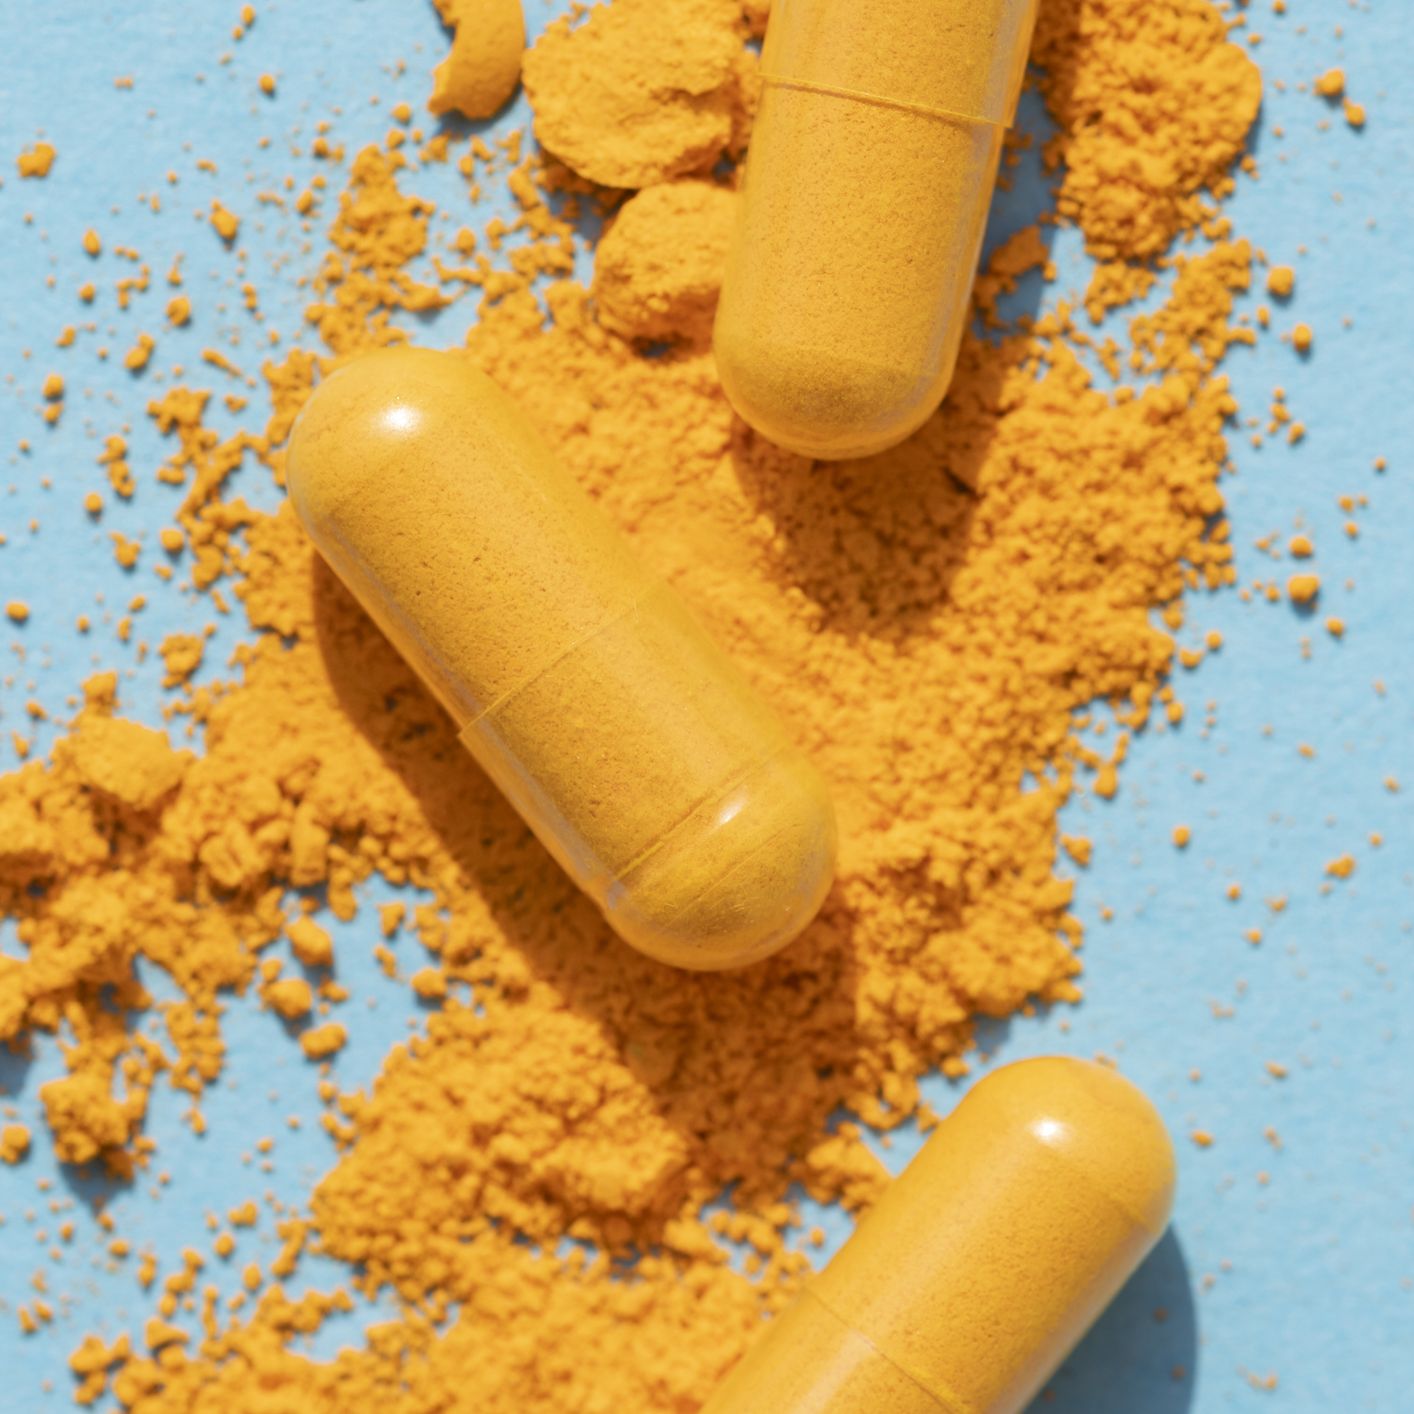 Curcumin Supplements Can Help Your Health. But There’s a Catch.